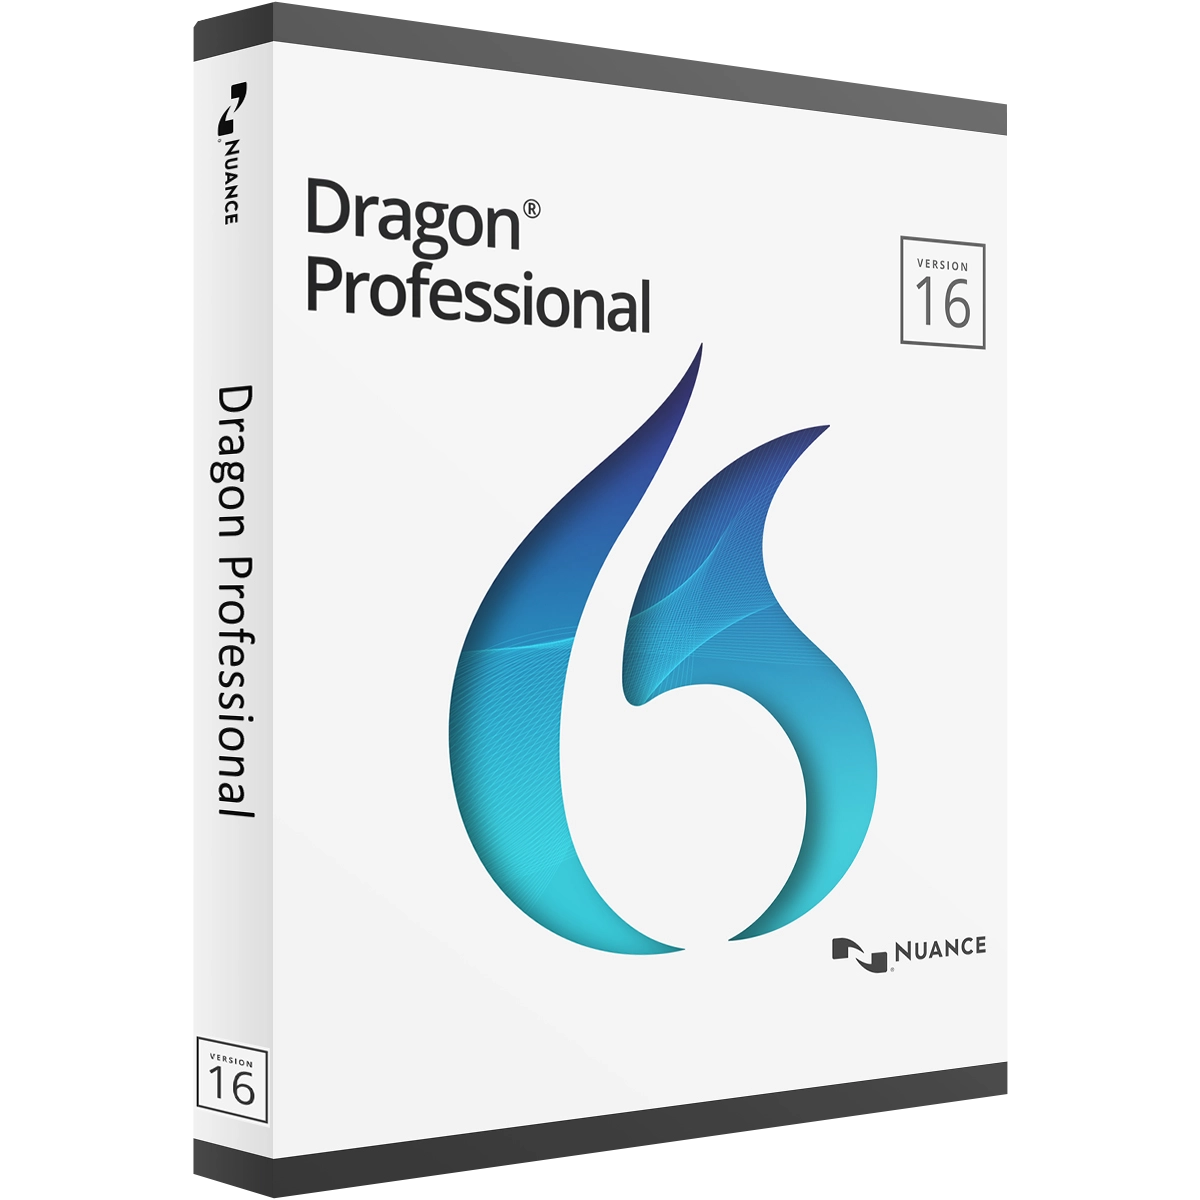 Dragon Professional barrierefrei